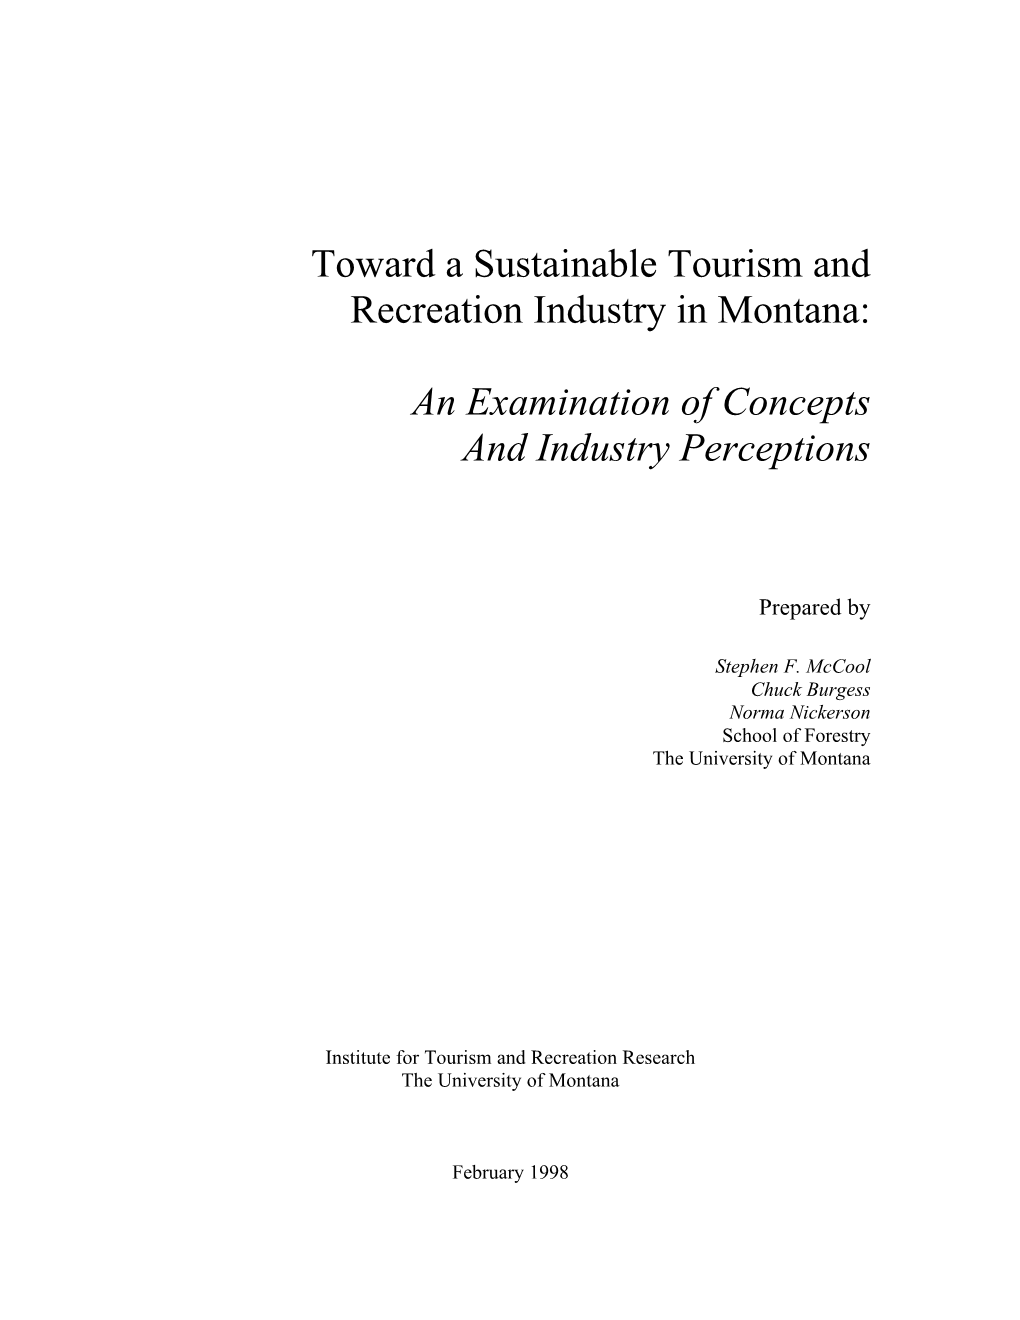 Toward a Sustainable Tourism and Recreation Industry in Montana: An